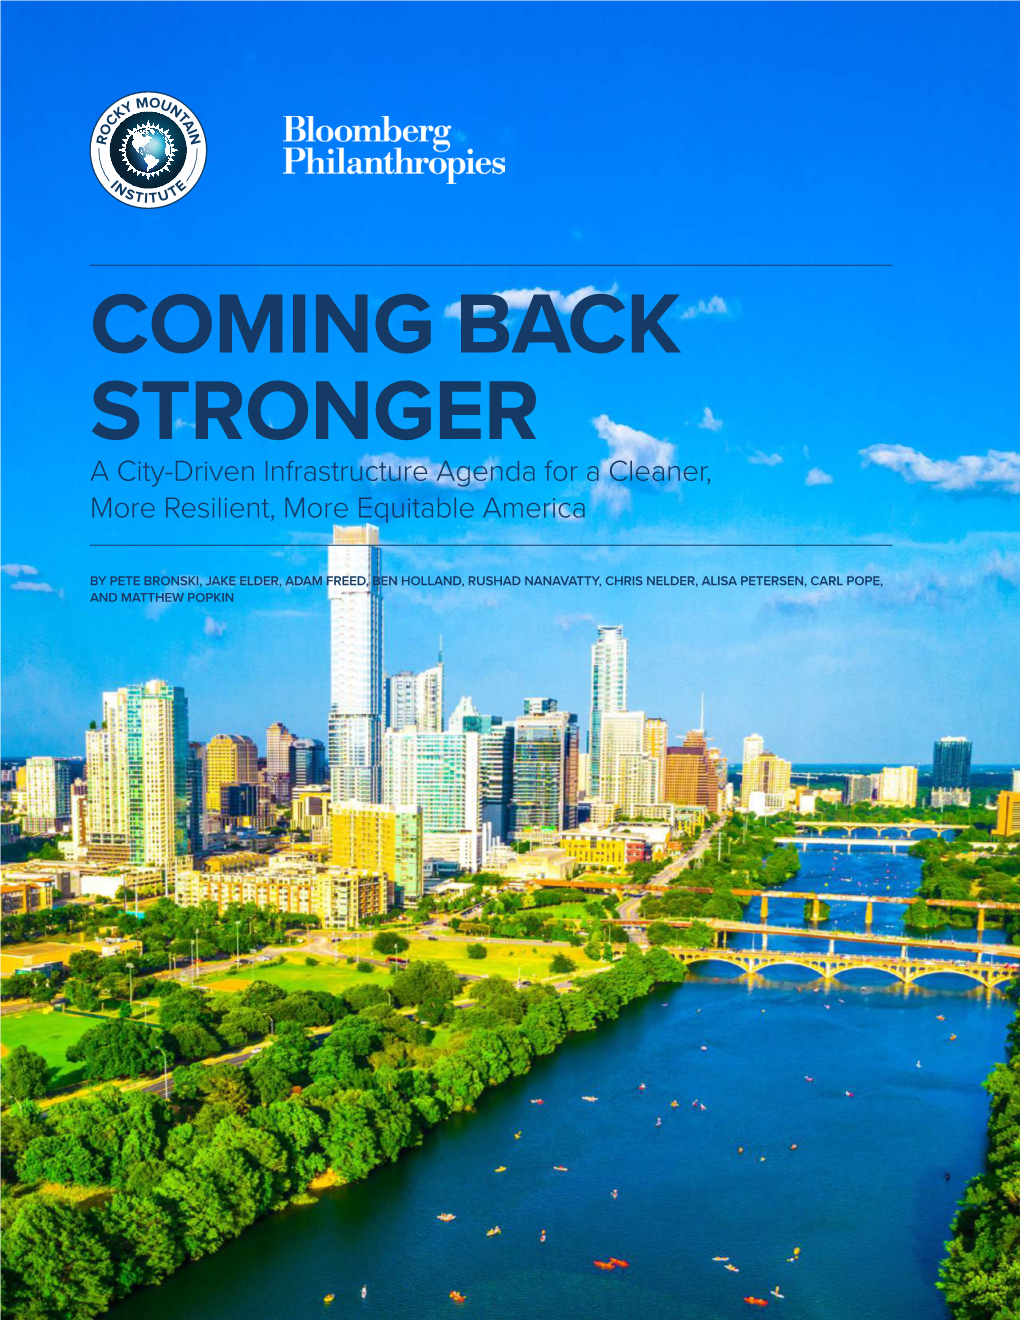 COMING BACK STRONGER a City-Driven Infrastructure Agenda for a Cleaner, More Resilient, More Equitable America